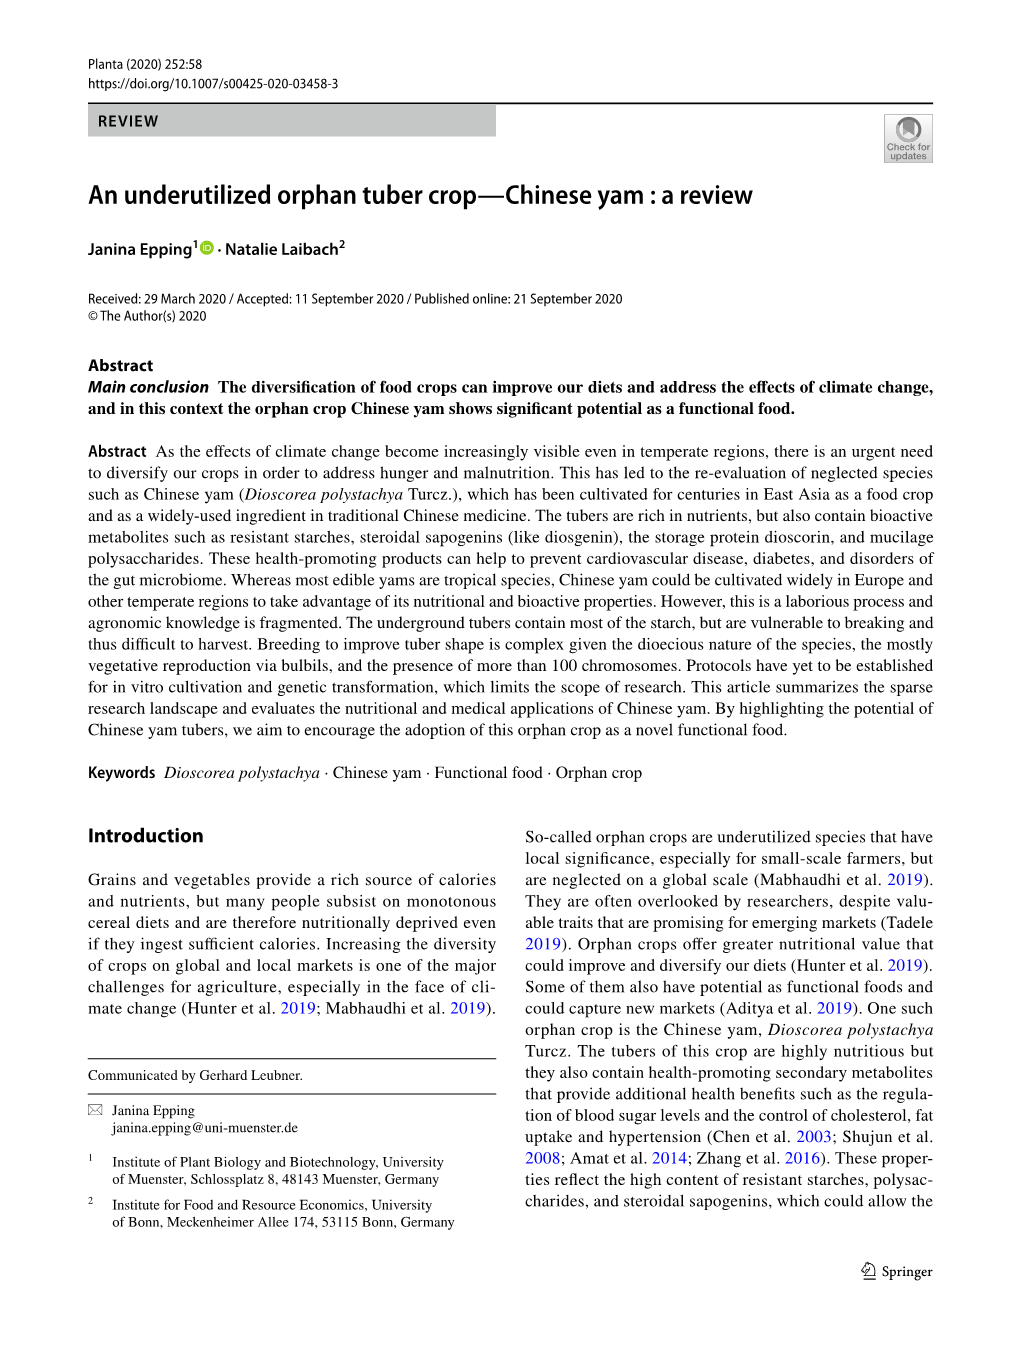 An Underutilized Orphan Tuber Crop—Chinese Yam : a Review